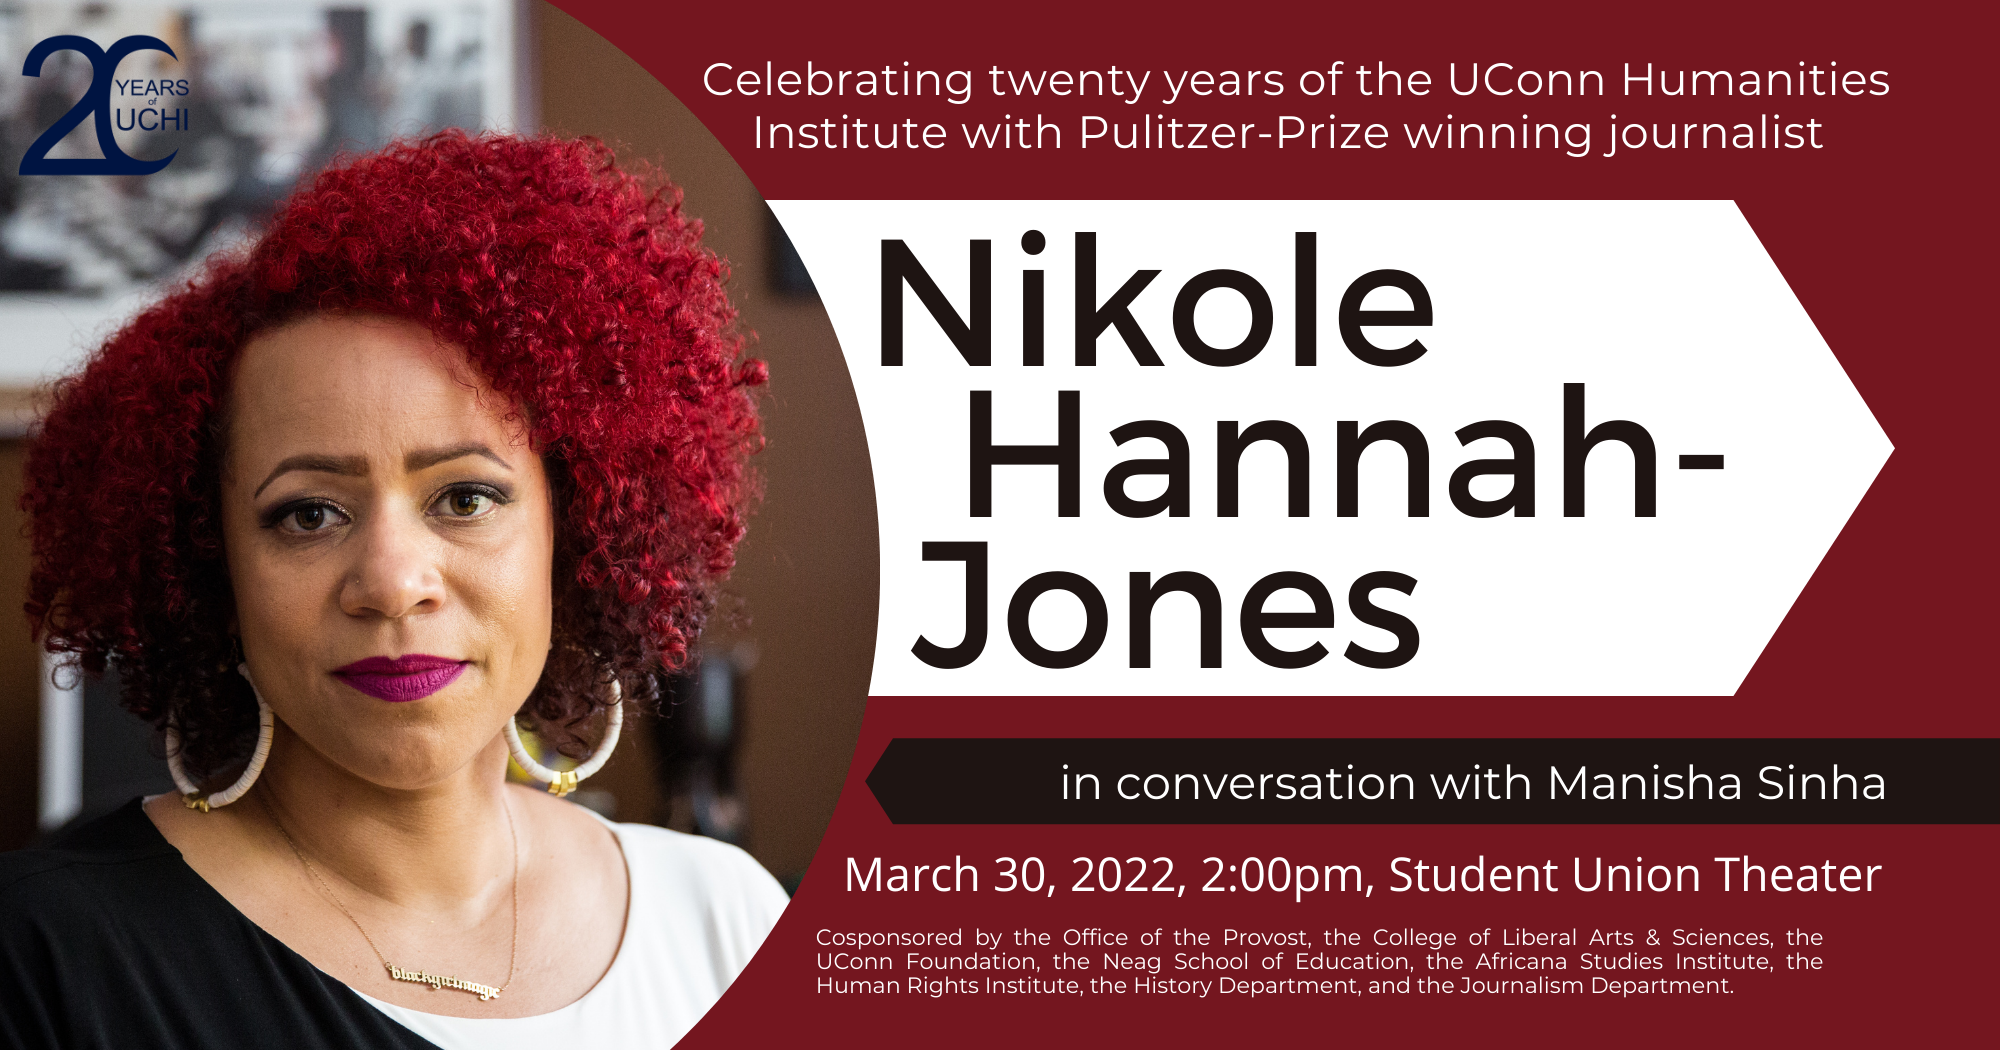 Celebrating 20 Years of the UConn Humanities Institute with Pulitzer-prize-winning journalist Nikole Hannah-Jones in conversation with Manisha Sinha. March 30, 2022, 2:00pm, Student Union Theater.